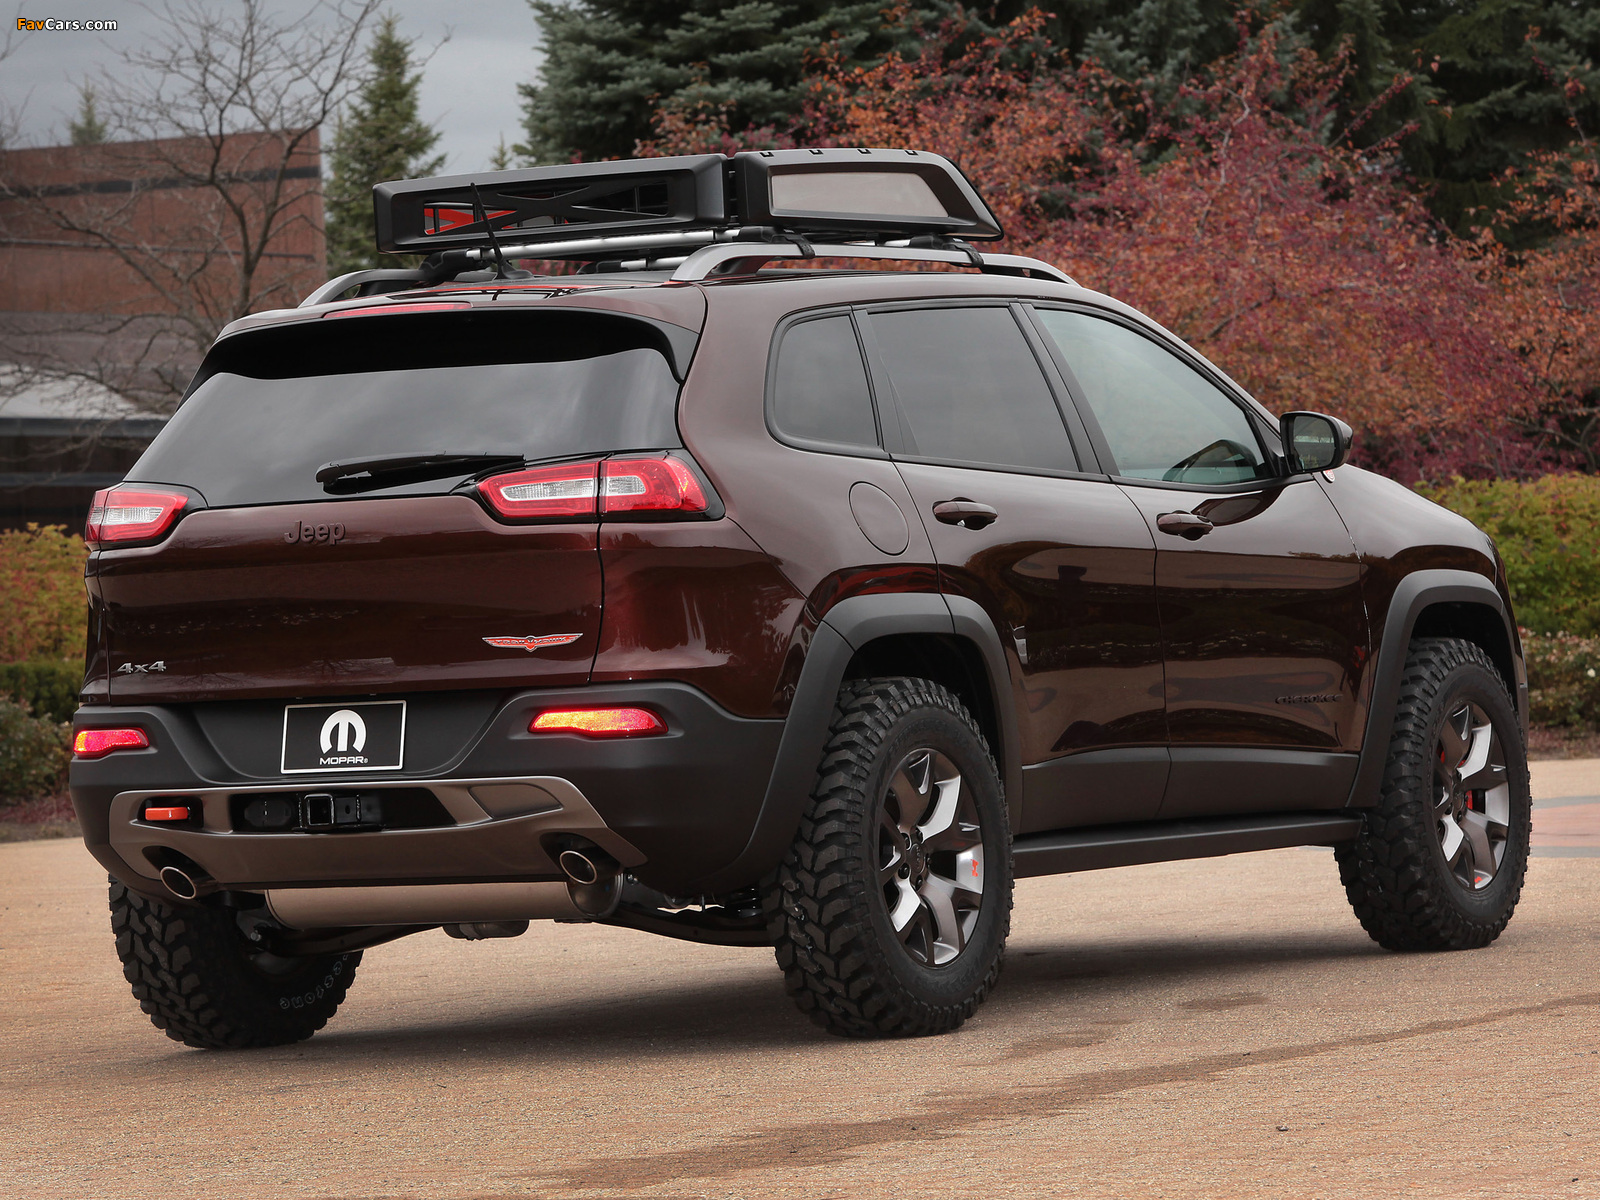 Jeep Cherokee Trail Carver (KL) 2013 pictures (1600 x 1200)